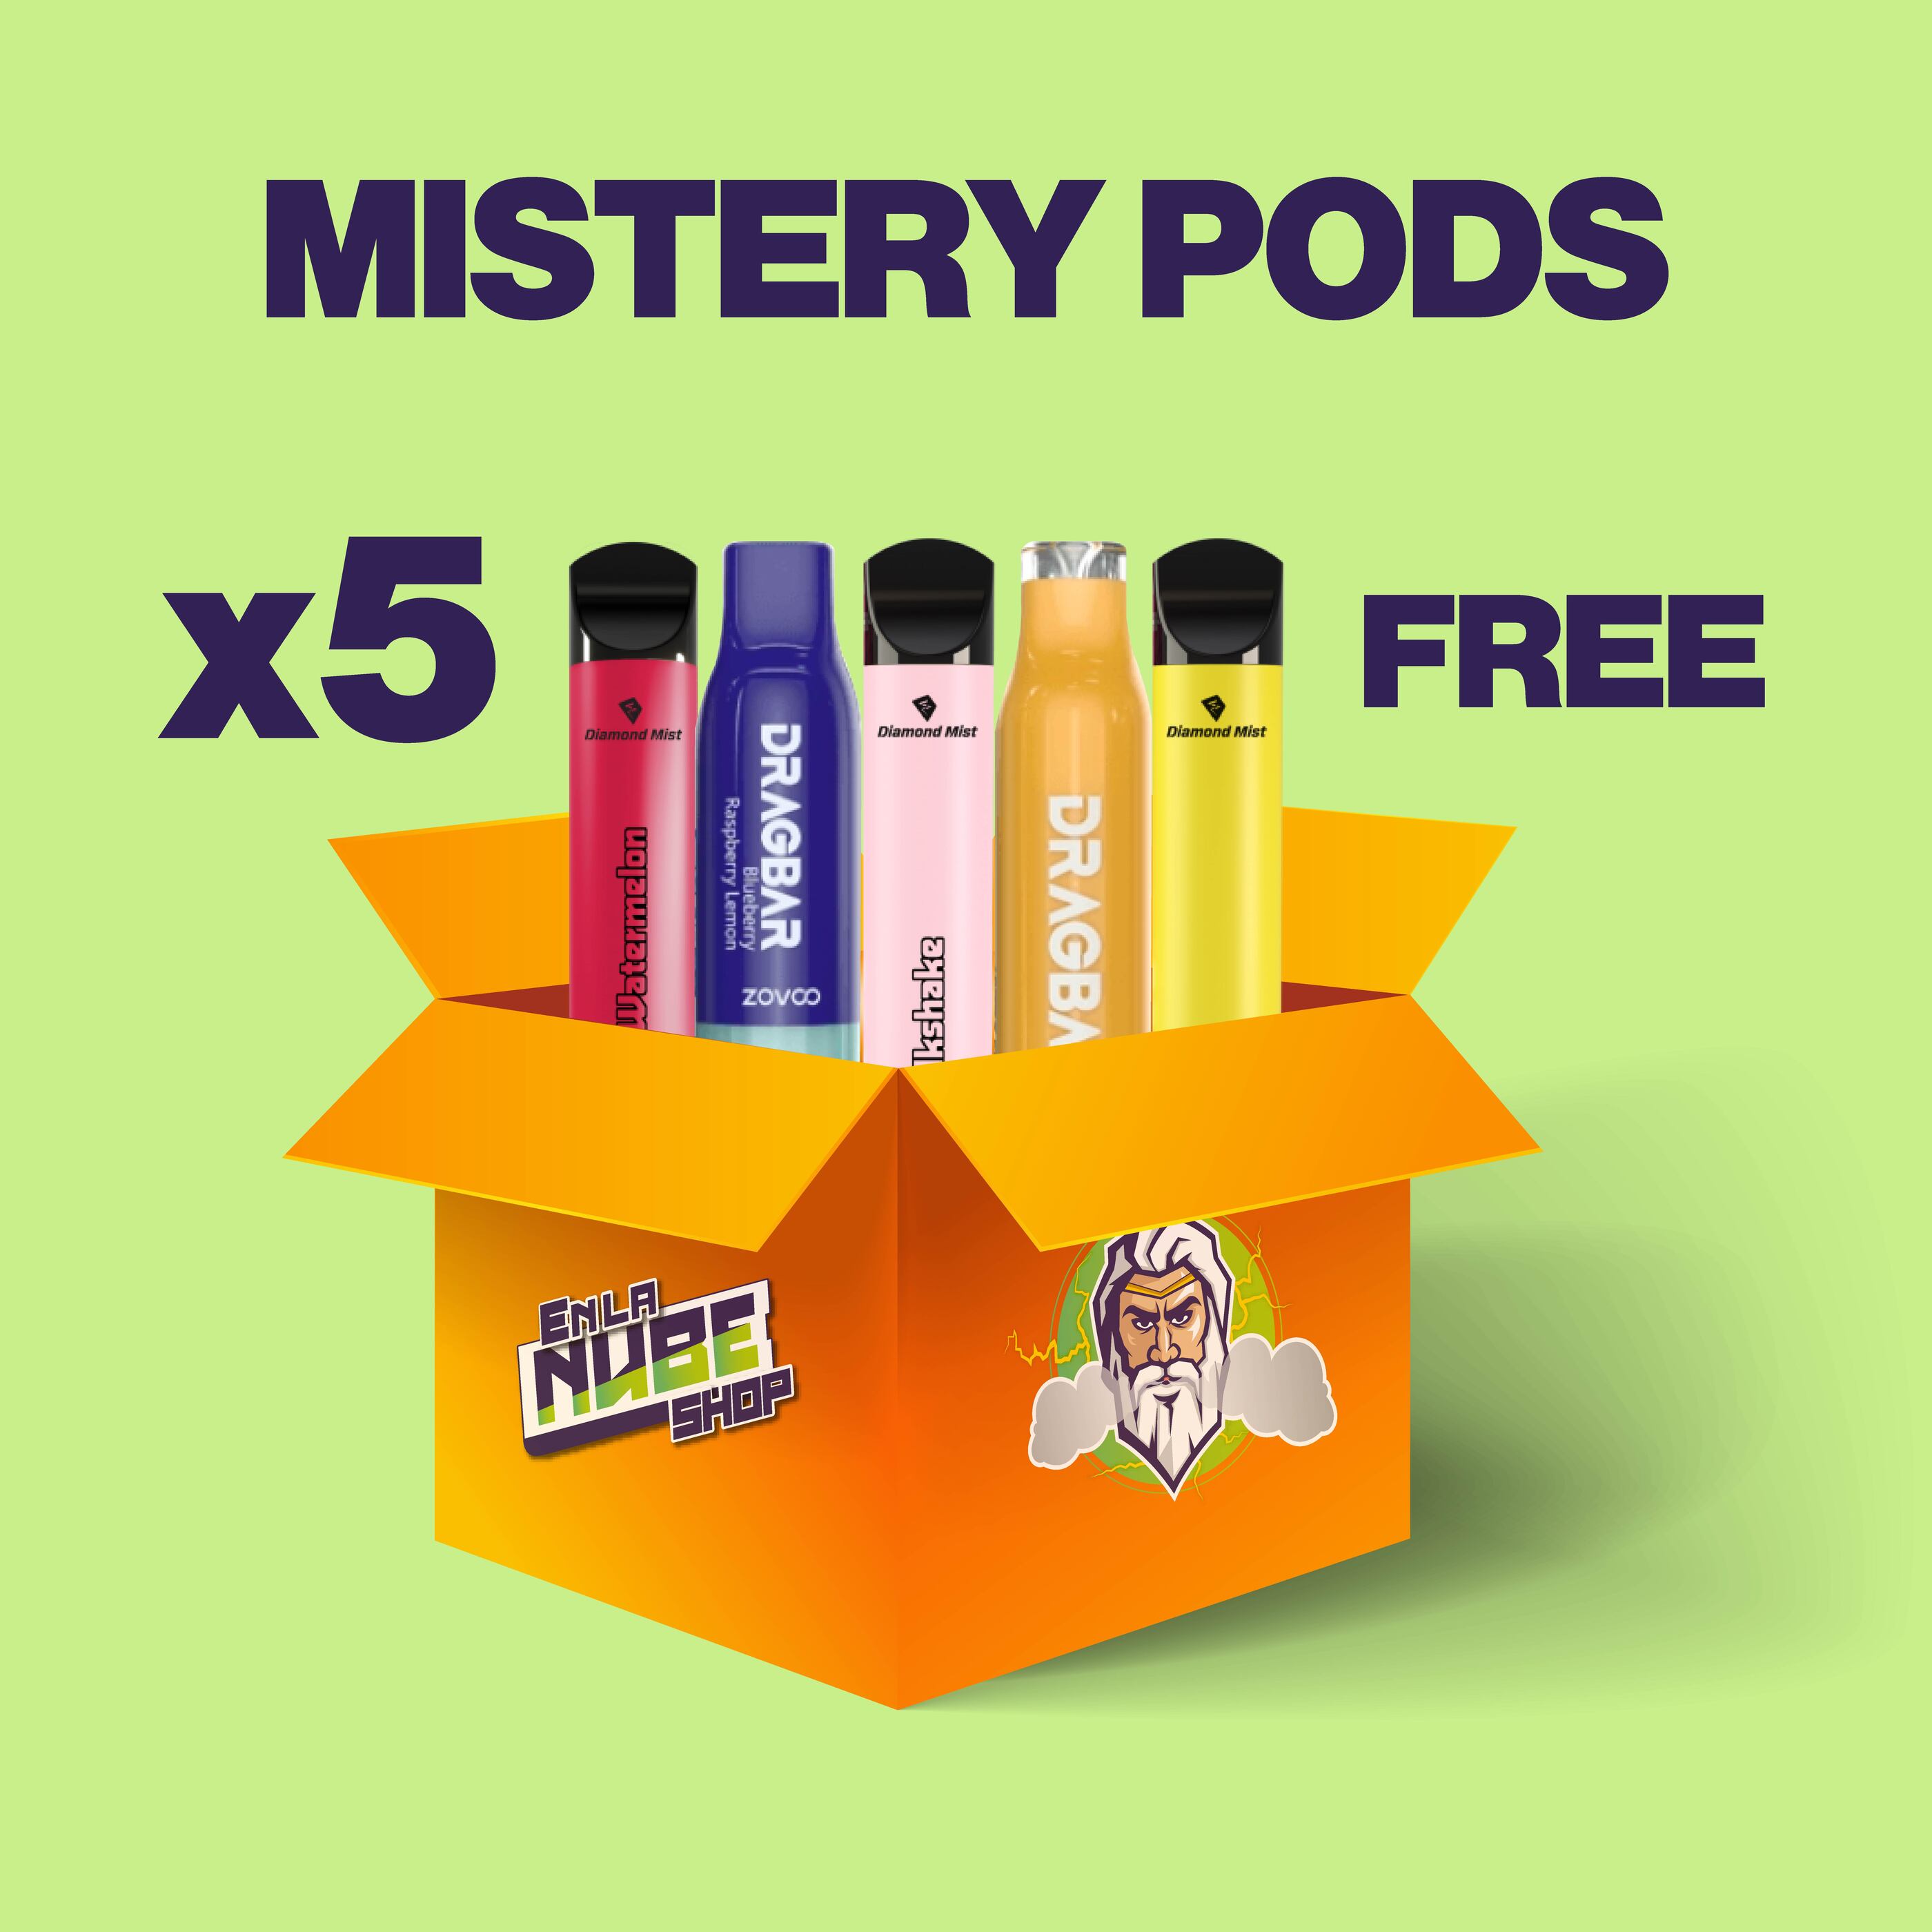 PACK 5 PODS FREE MISTERY PODS